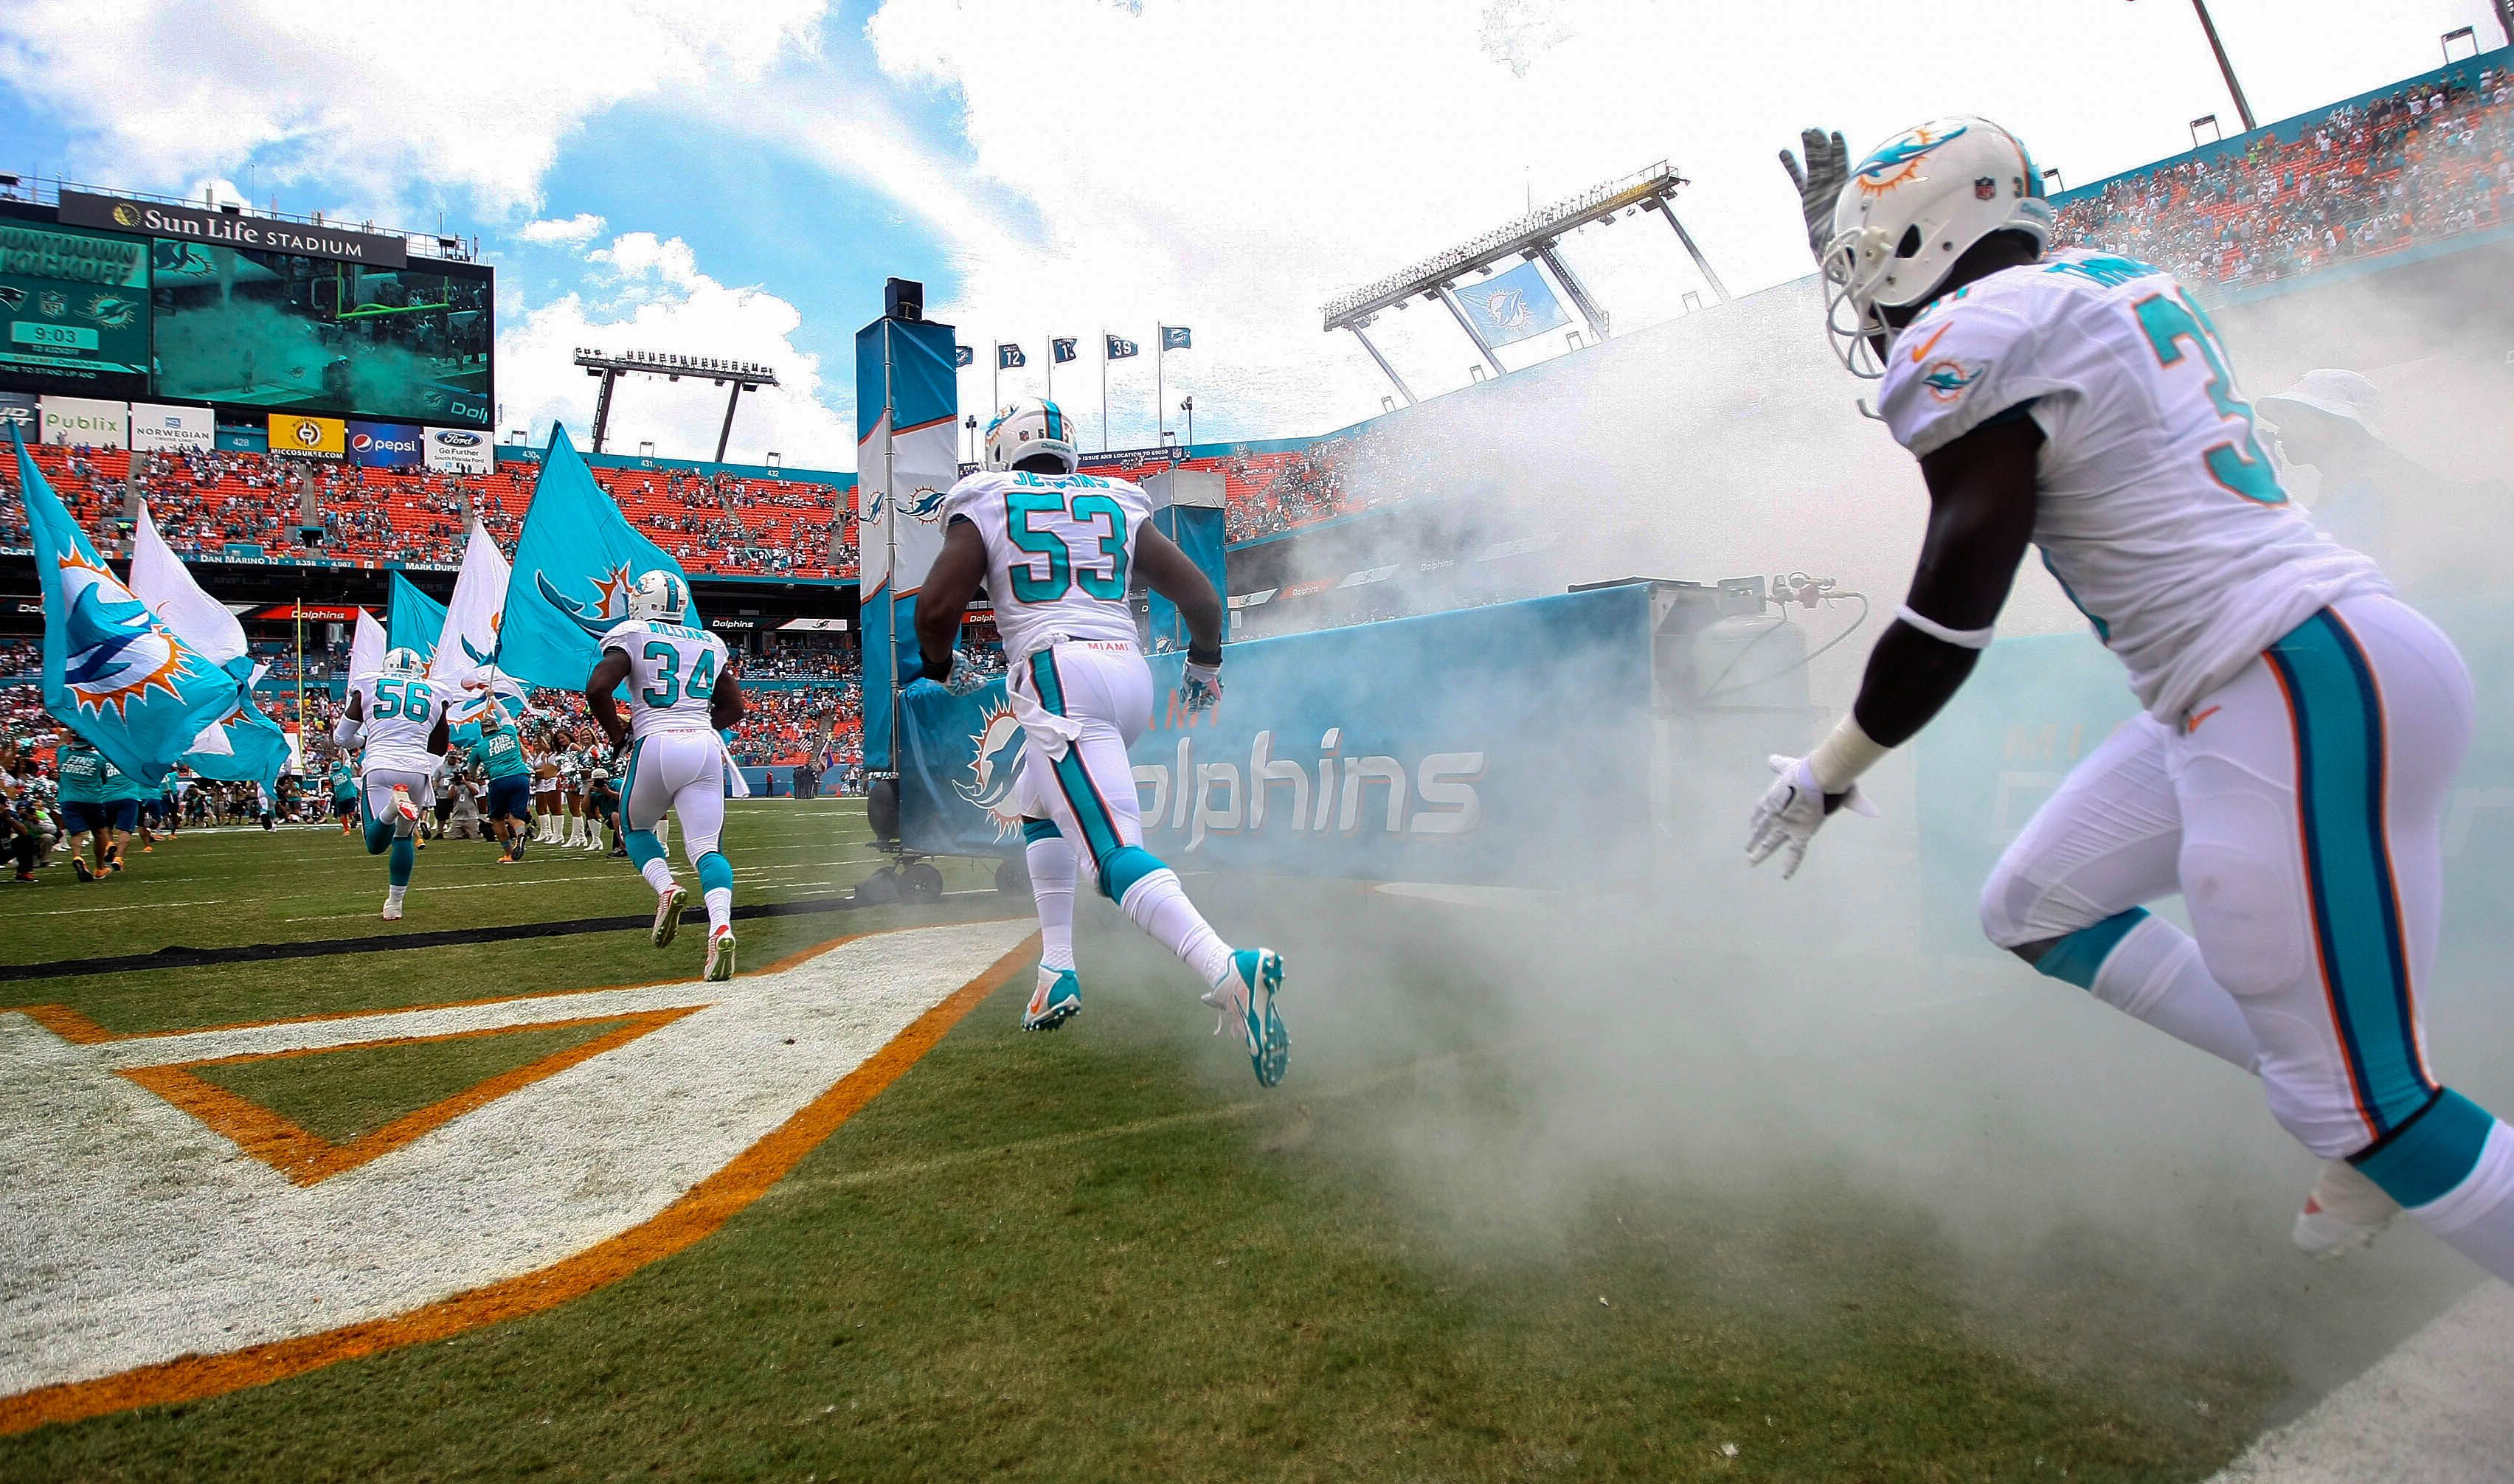 Miami Dolphins High Quality HD Wallpapers 2015 - All HD Wallpapers